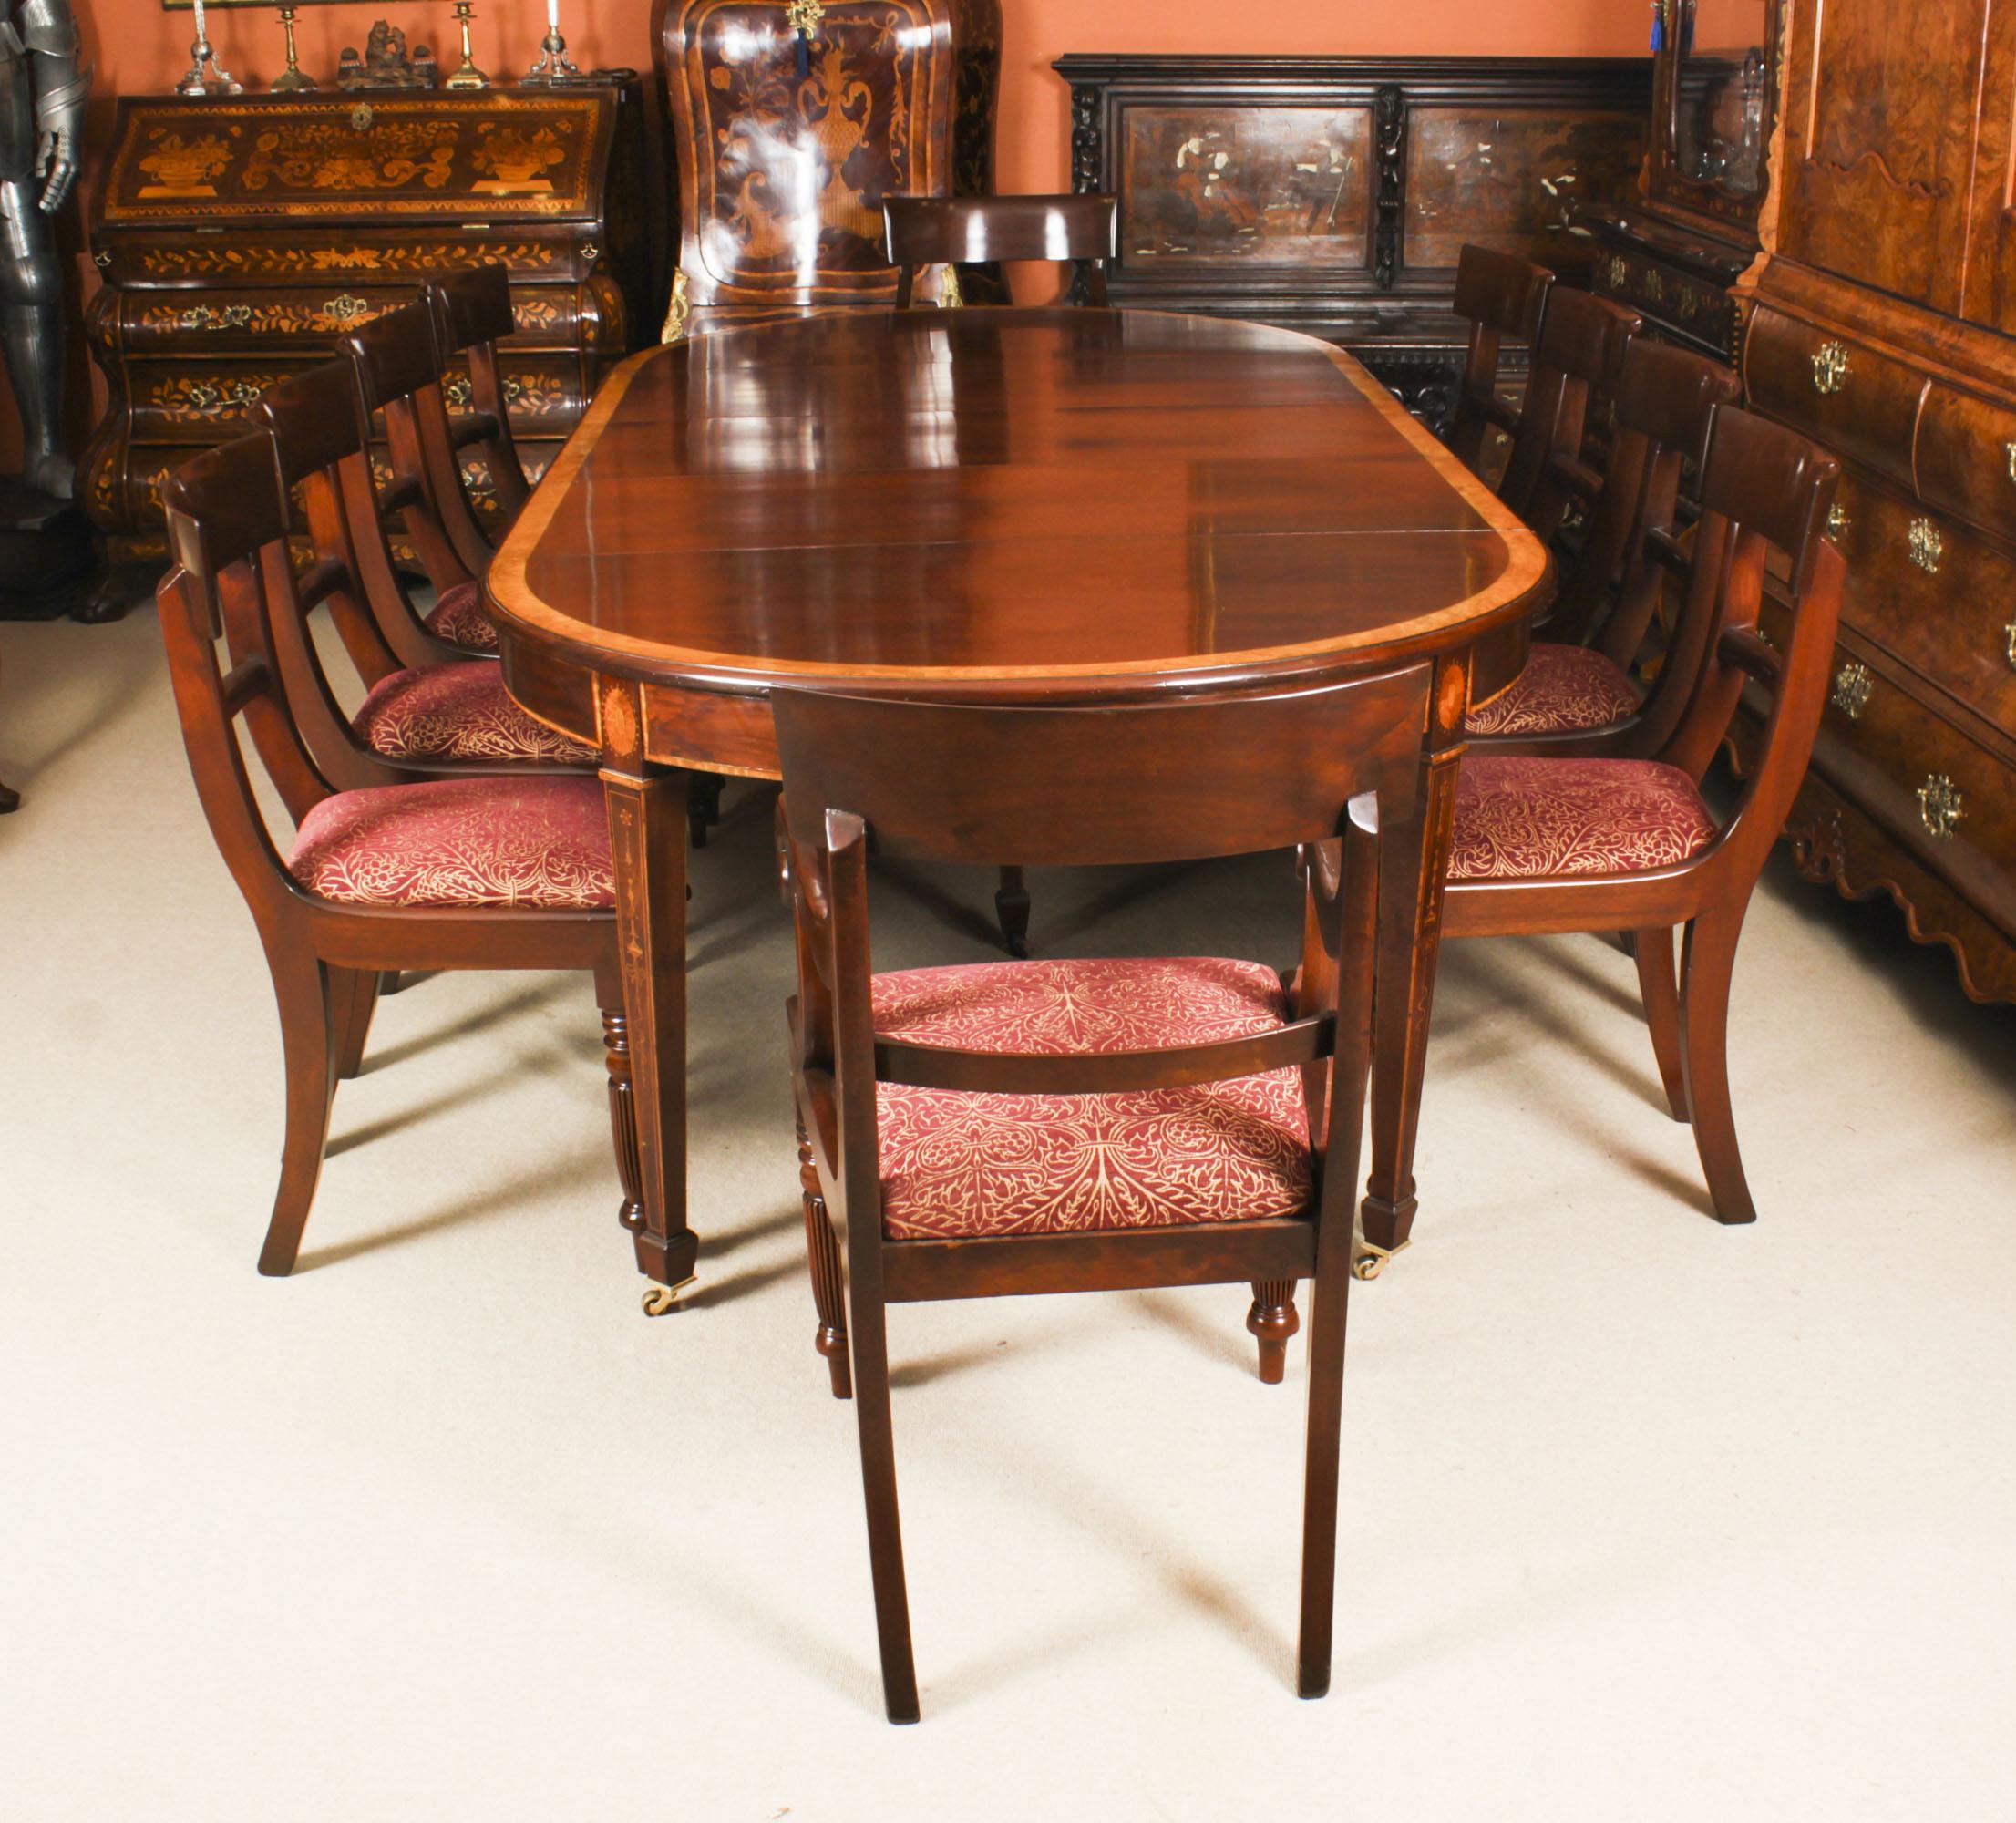 This is a fabulous dining set comprising an antique Edwardian inlaid flame mahogany extending dining table with an antique set of ten back dining chairs, 19th C in date.

The table has three original leaves and can comfortably seat ten. It has